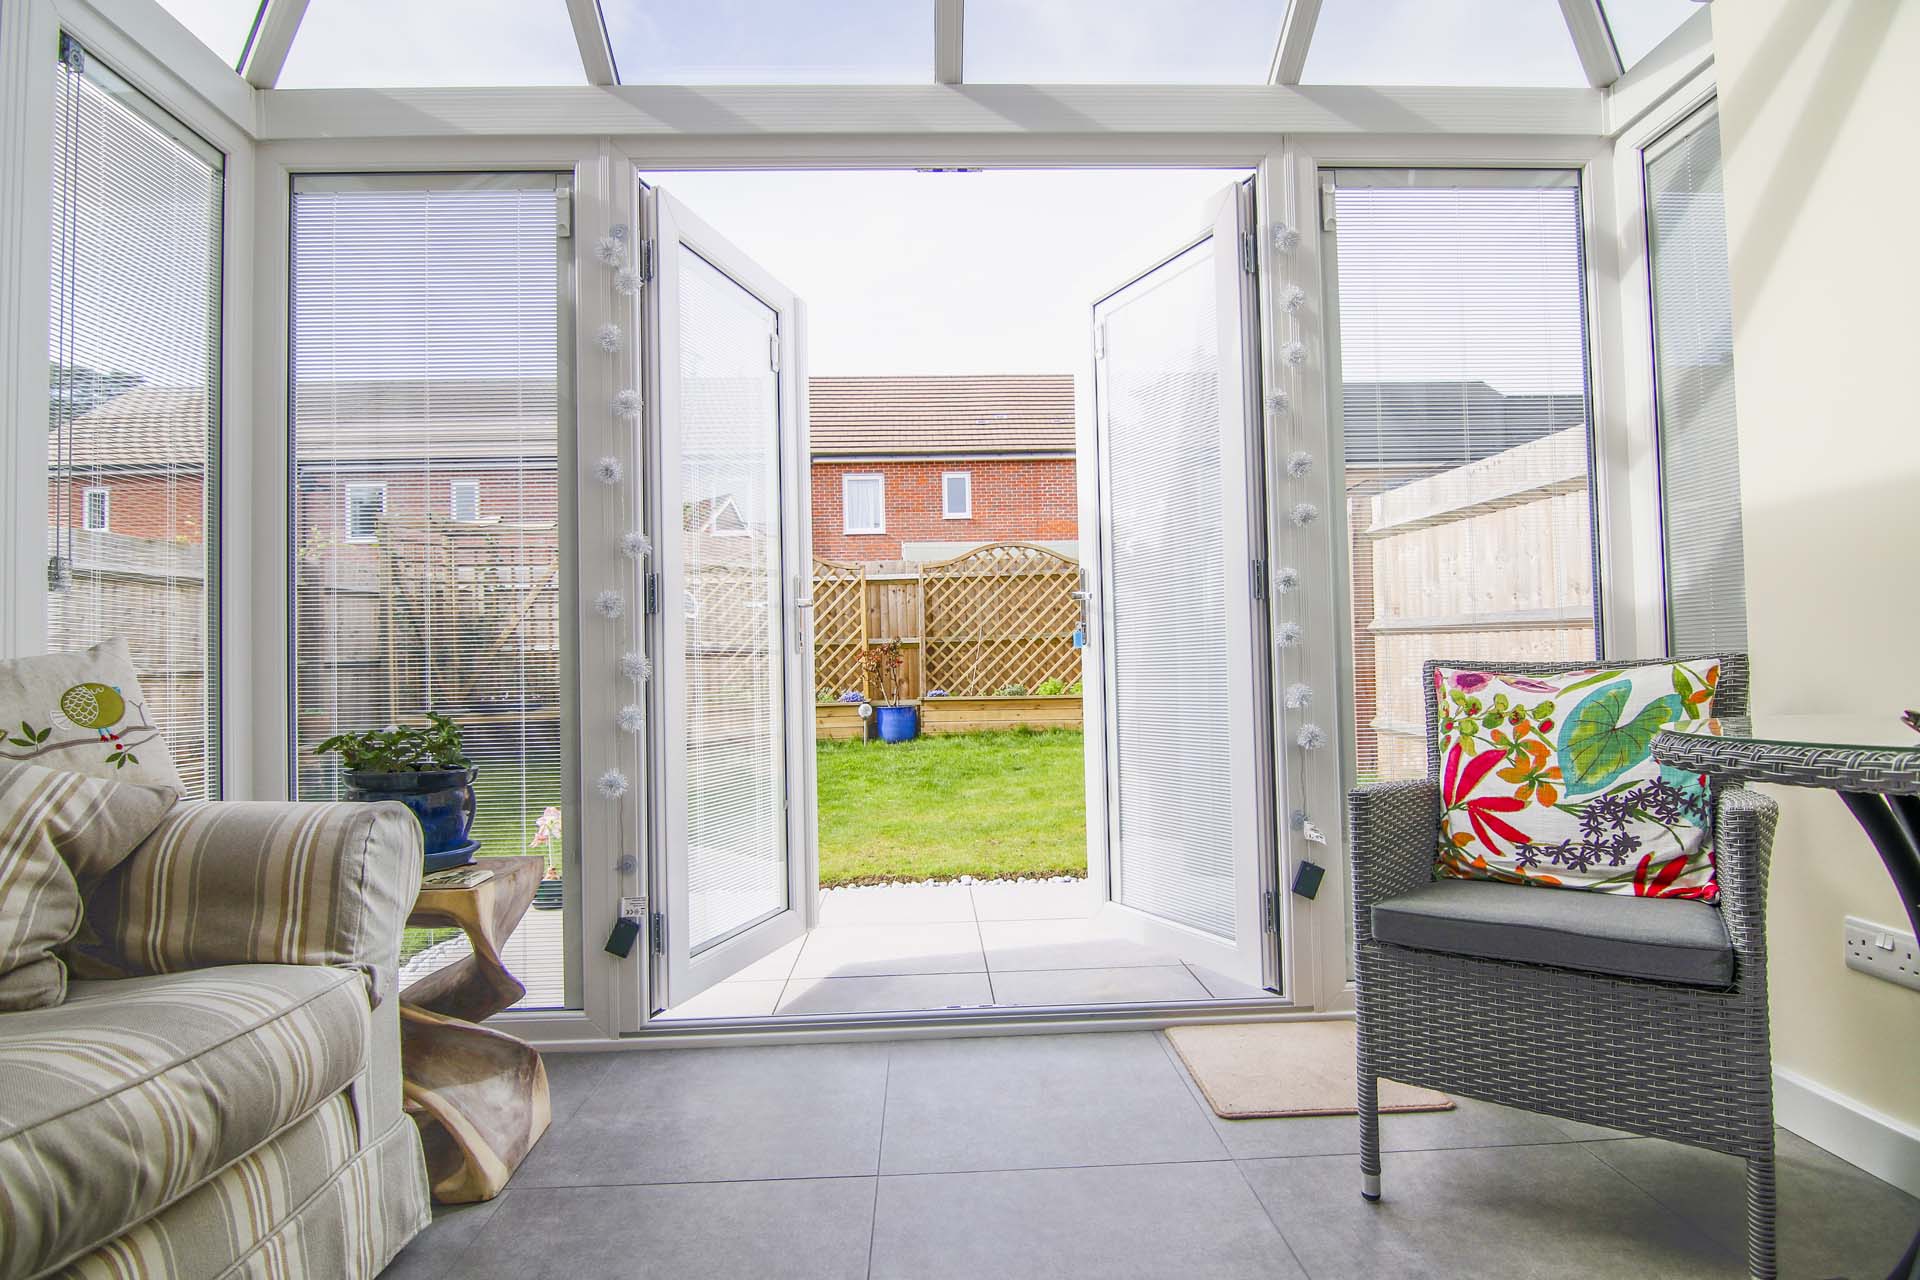 A conservatory with wide open French doors